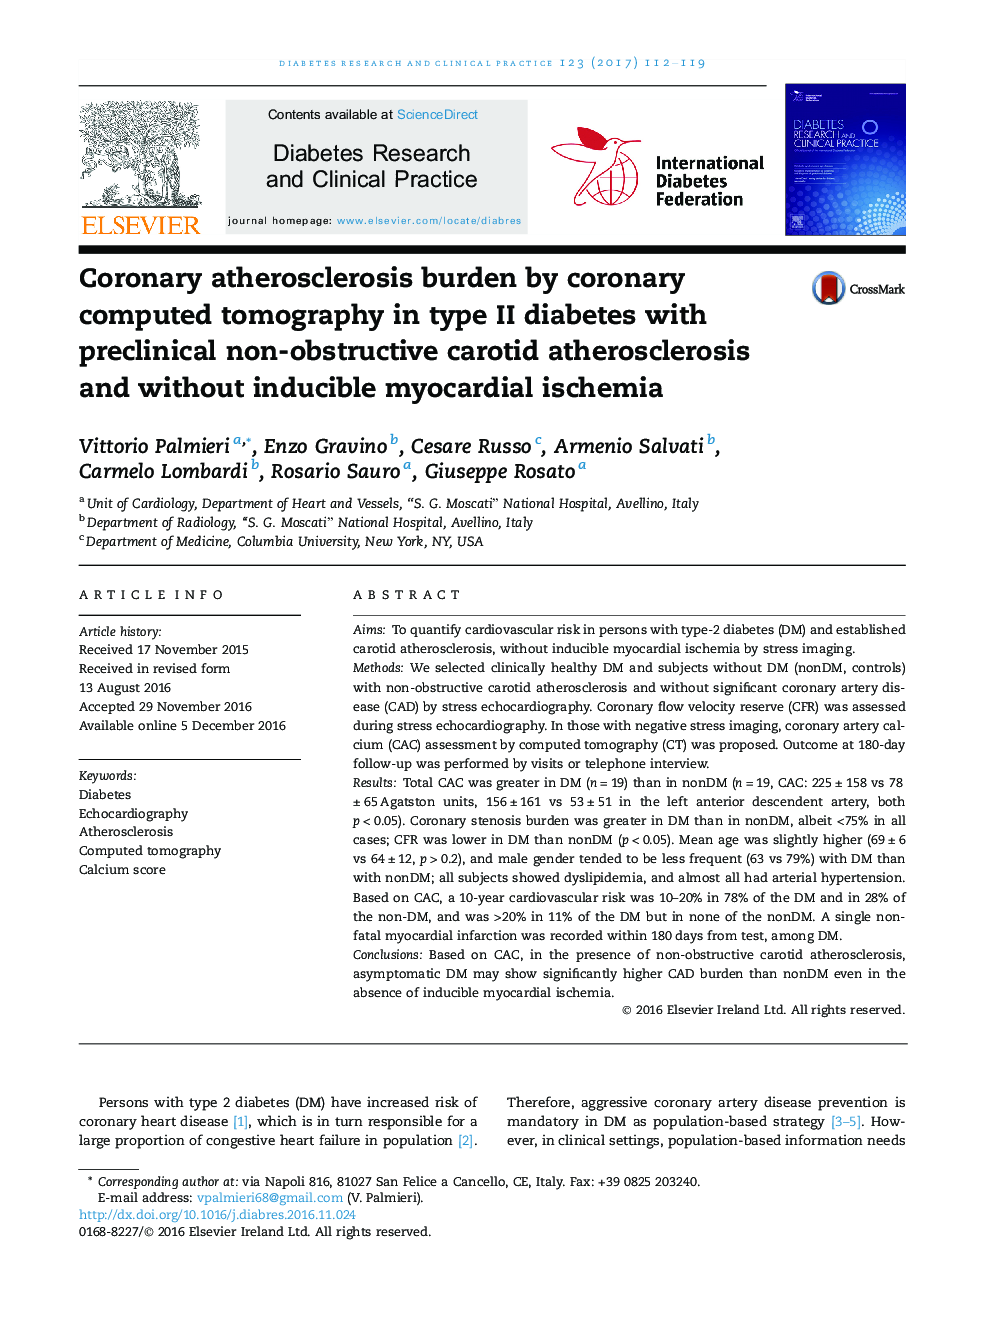 Coronary atherosclerosis burden by coronary computed tomography in type II diabetes with preclinical non-obstructive carotid atherosclerosis and without inducible myocardial ischemia